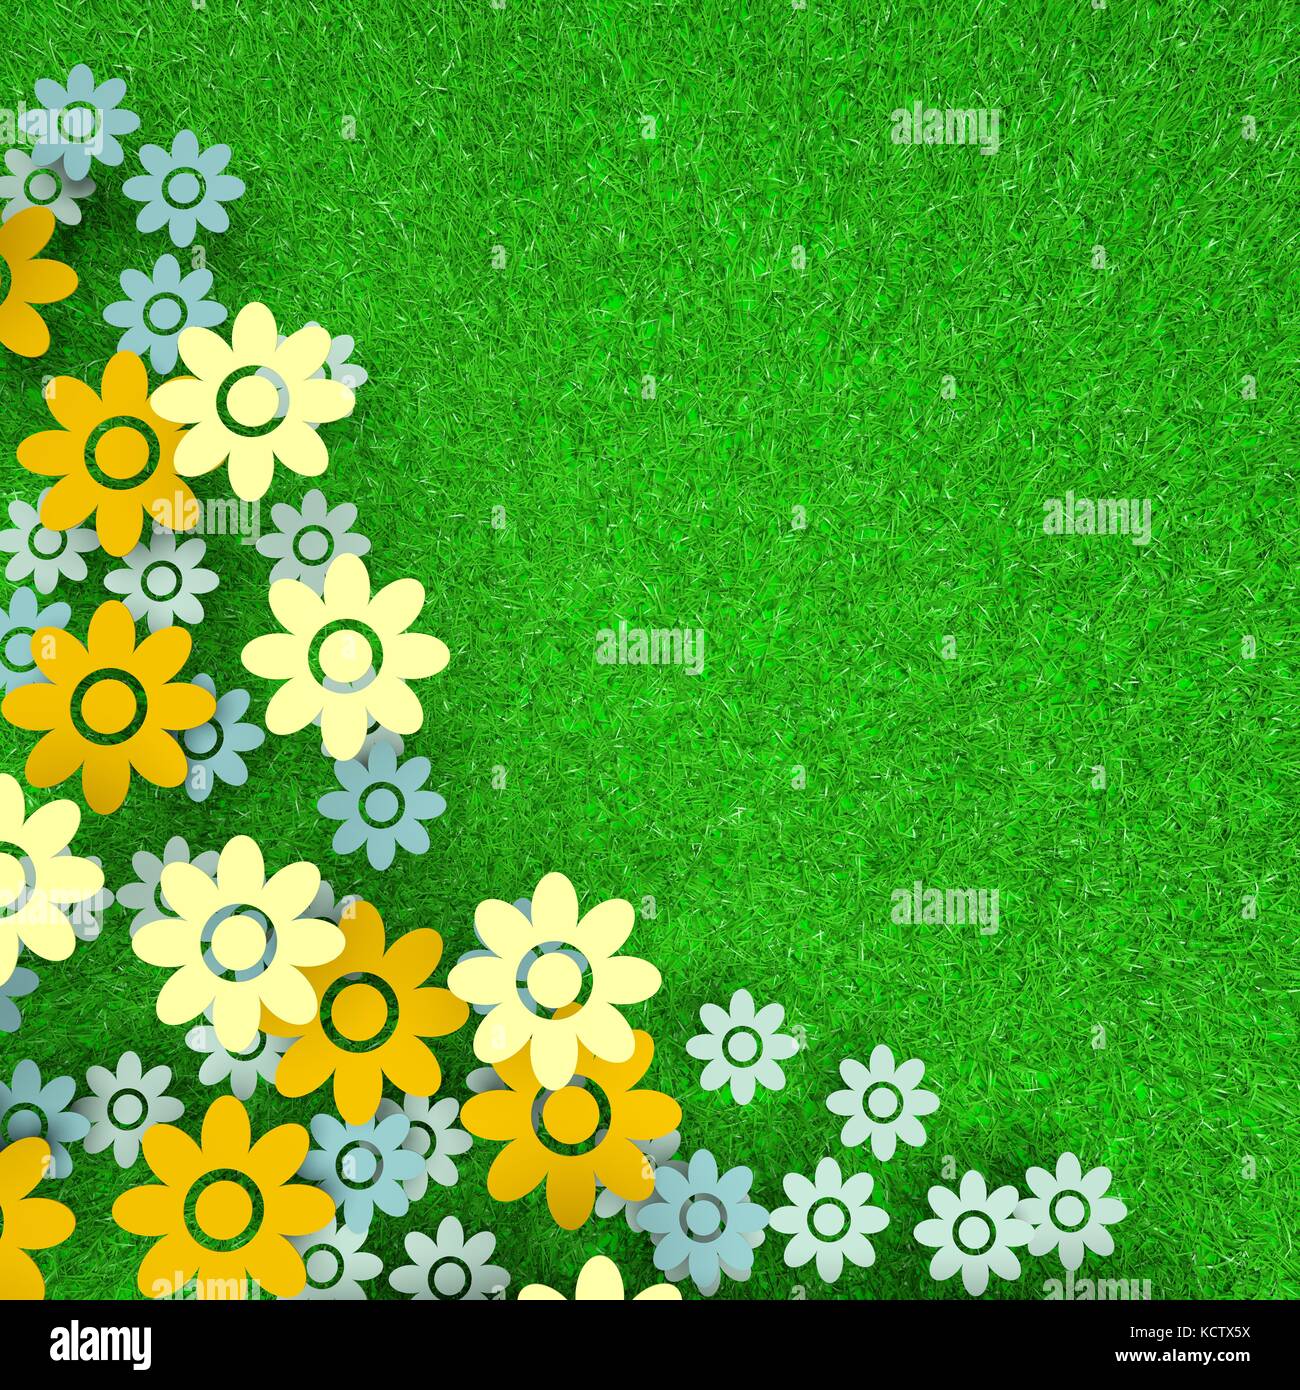 3d Colorful Floral Craft Wallpaper. Orange, Rose, Green, and Yellow Flowers  on a Light Background Stock Photo - Image of flowers, leaf: 270378266